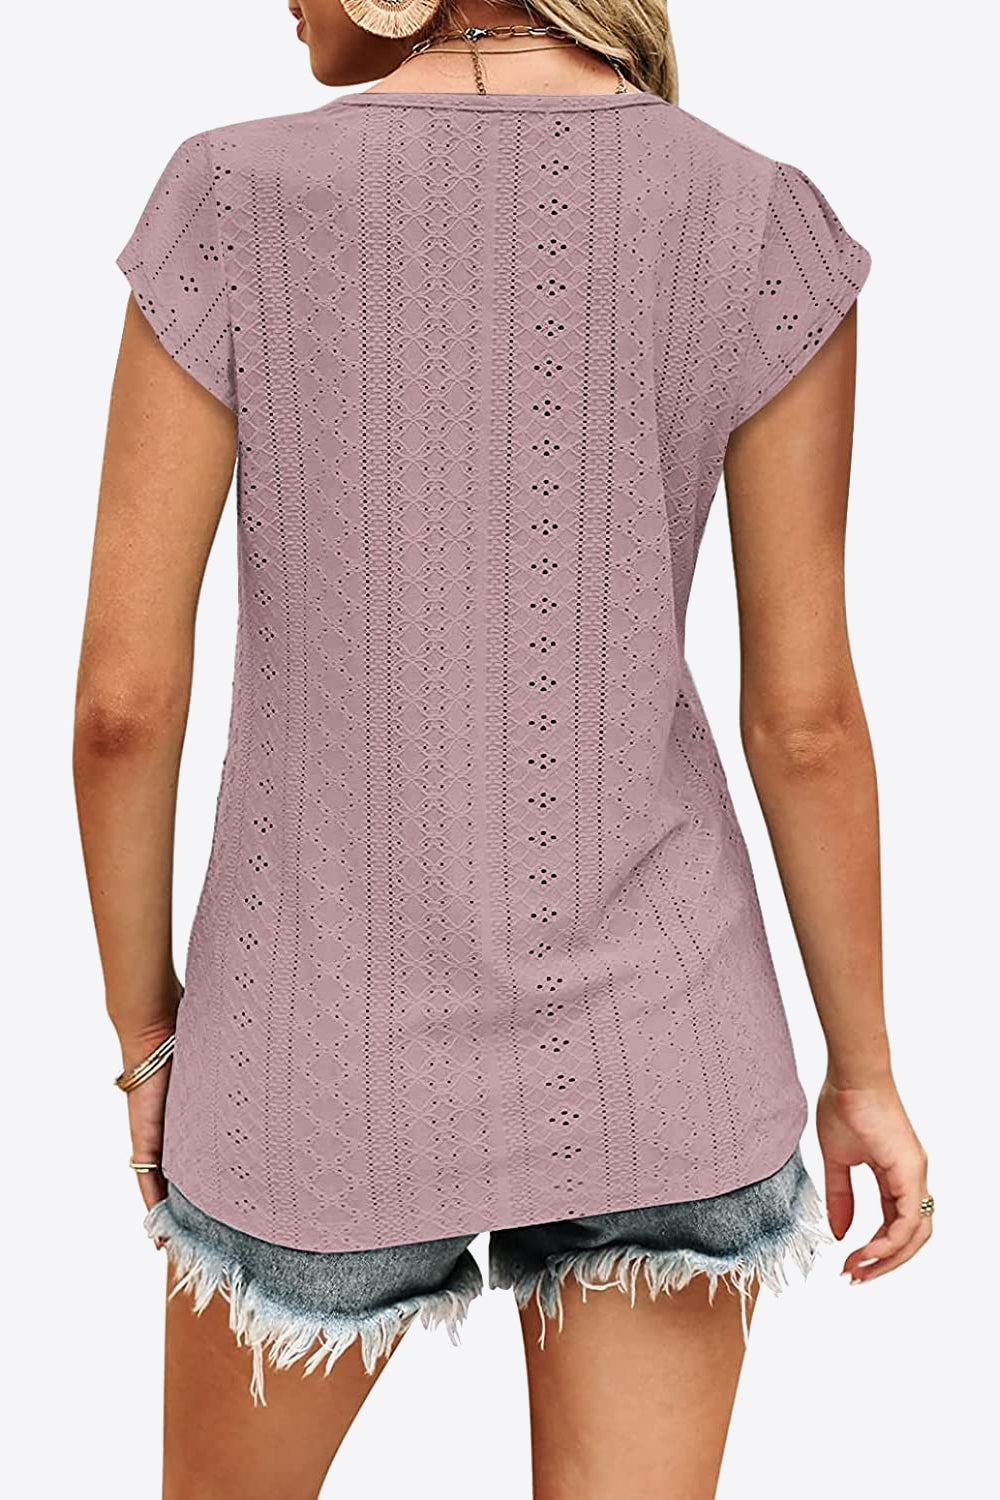 Back View, Eyelet Contrast V-Neck Tee In Lilac